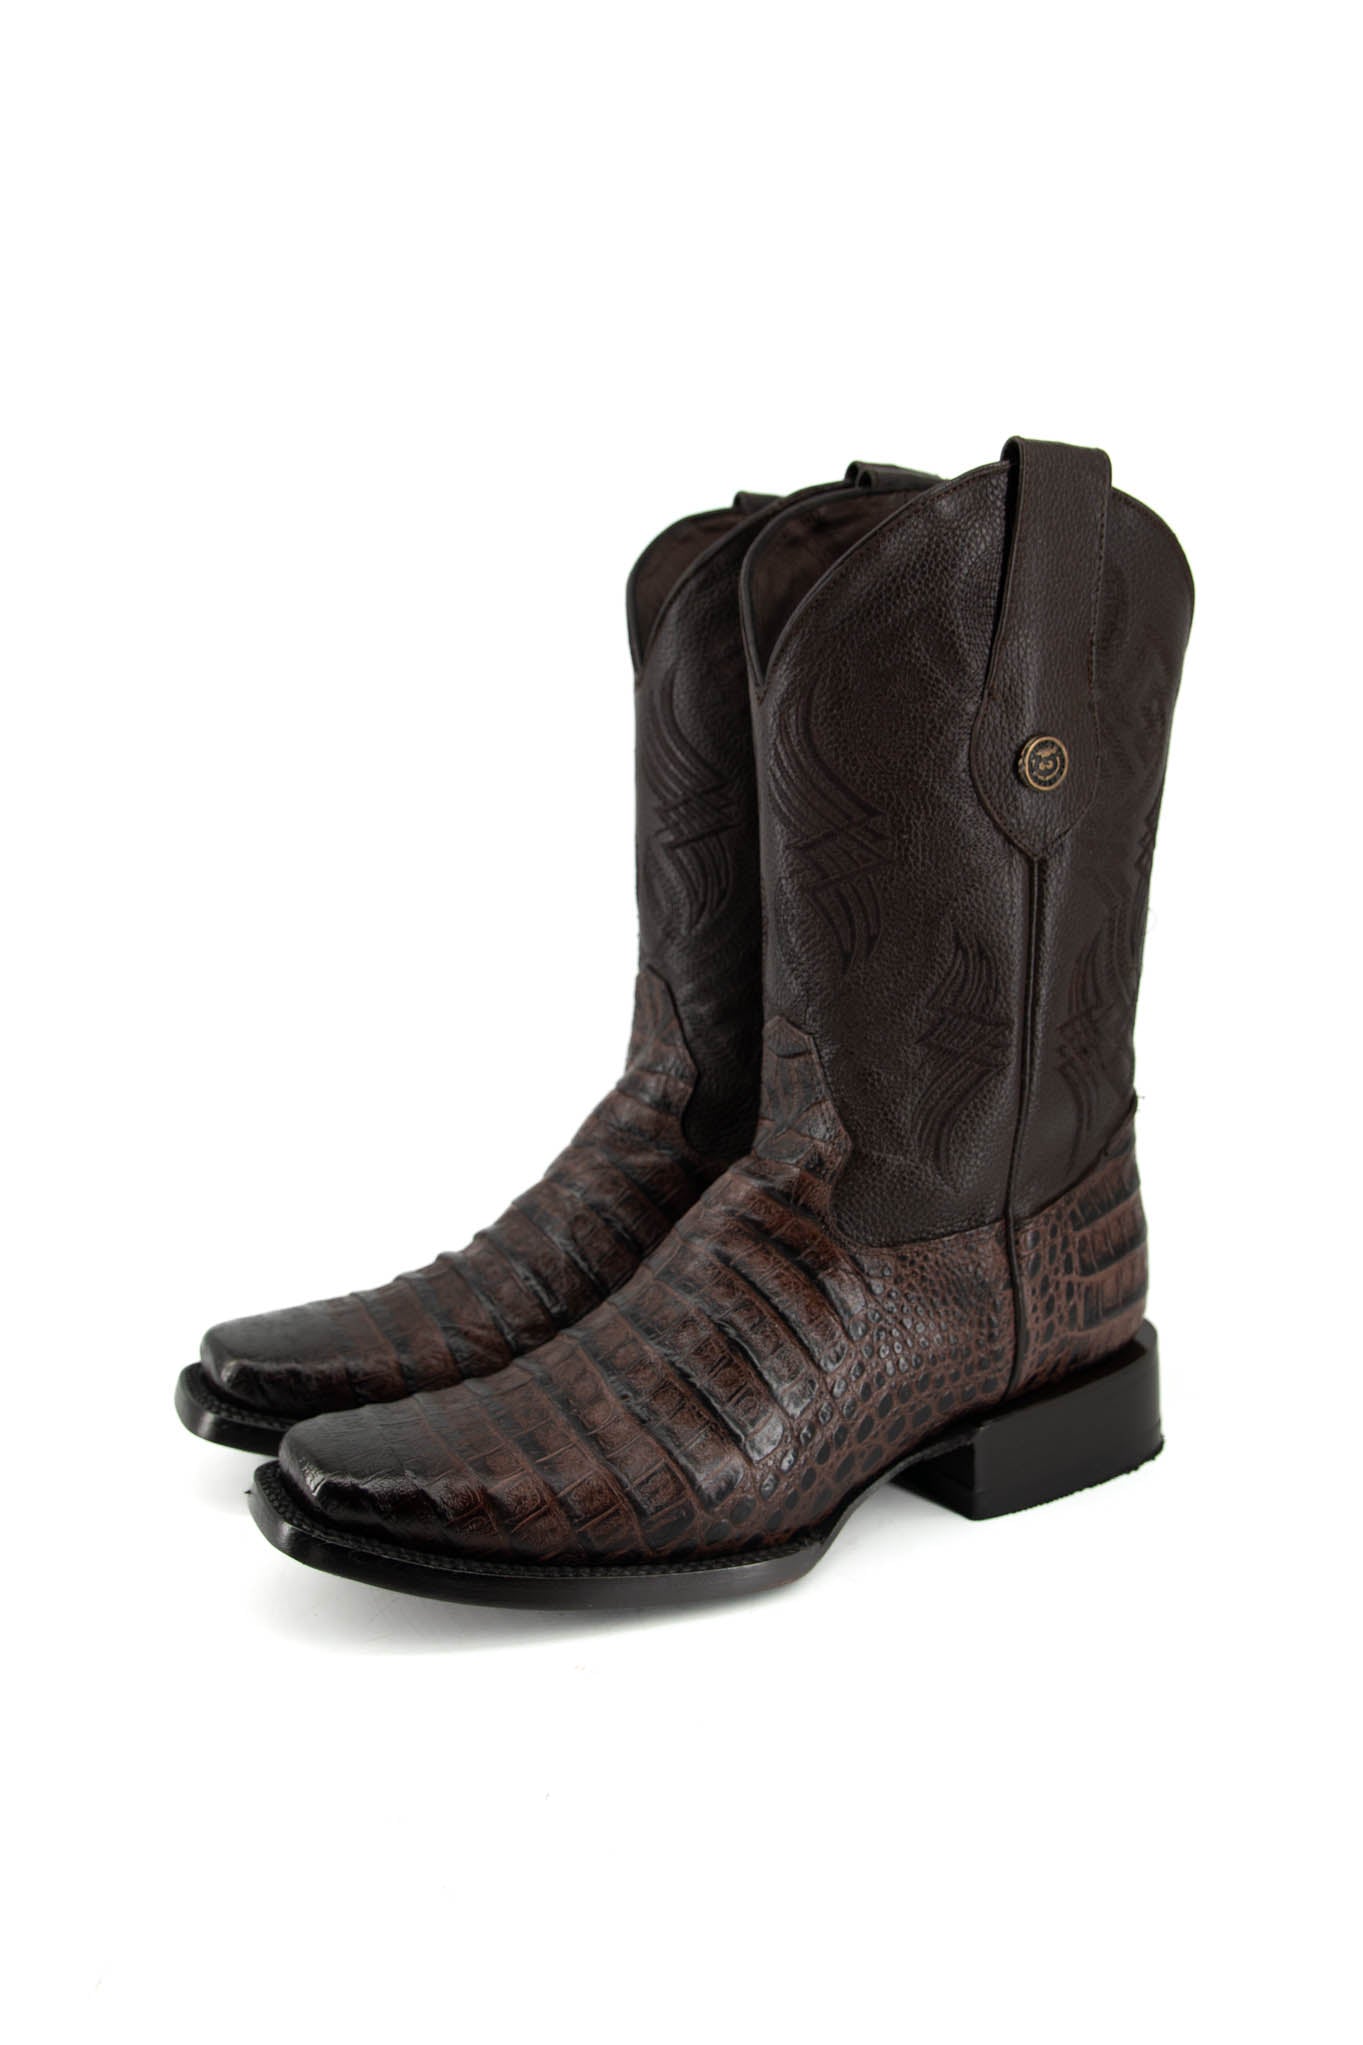 Coco Belly Rodeo Toe Cowboy Boot